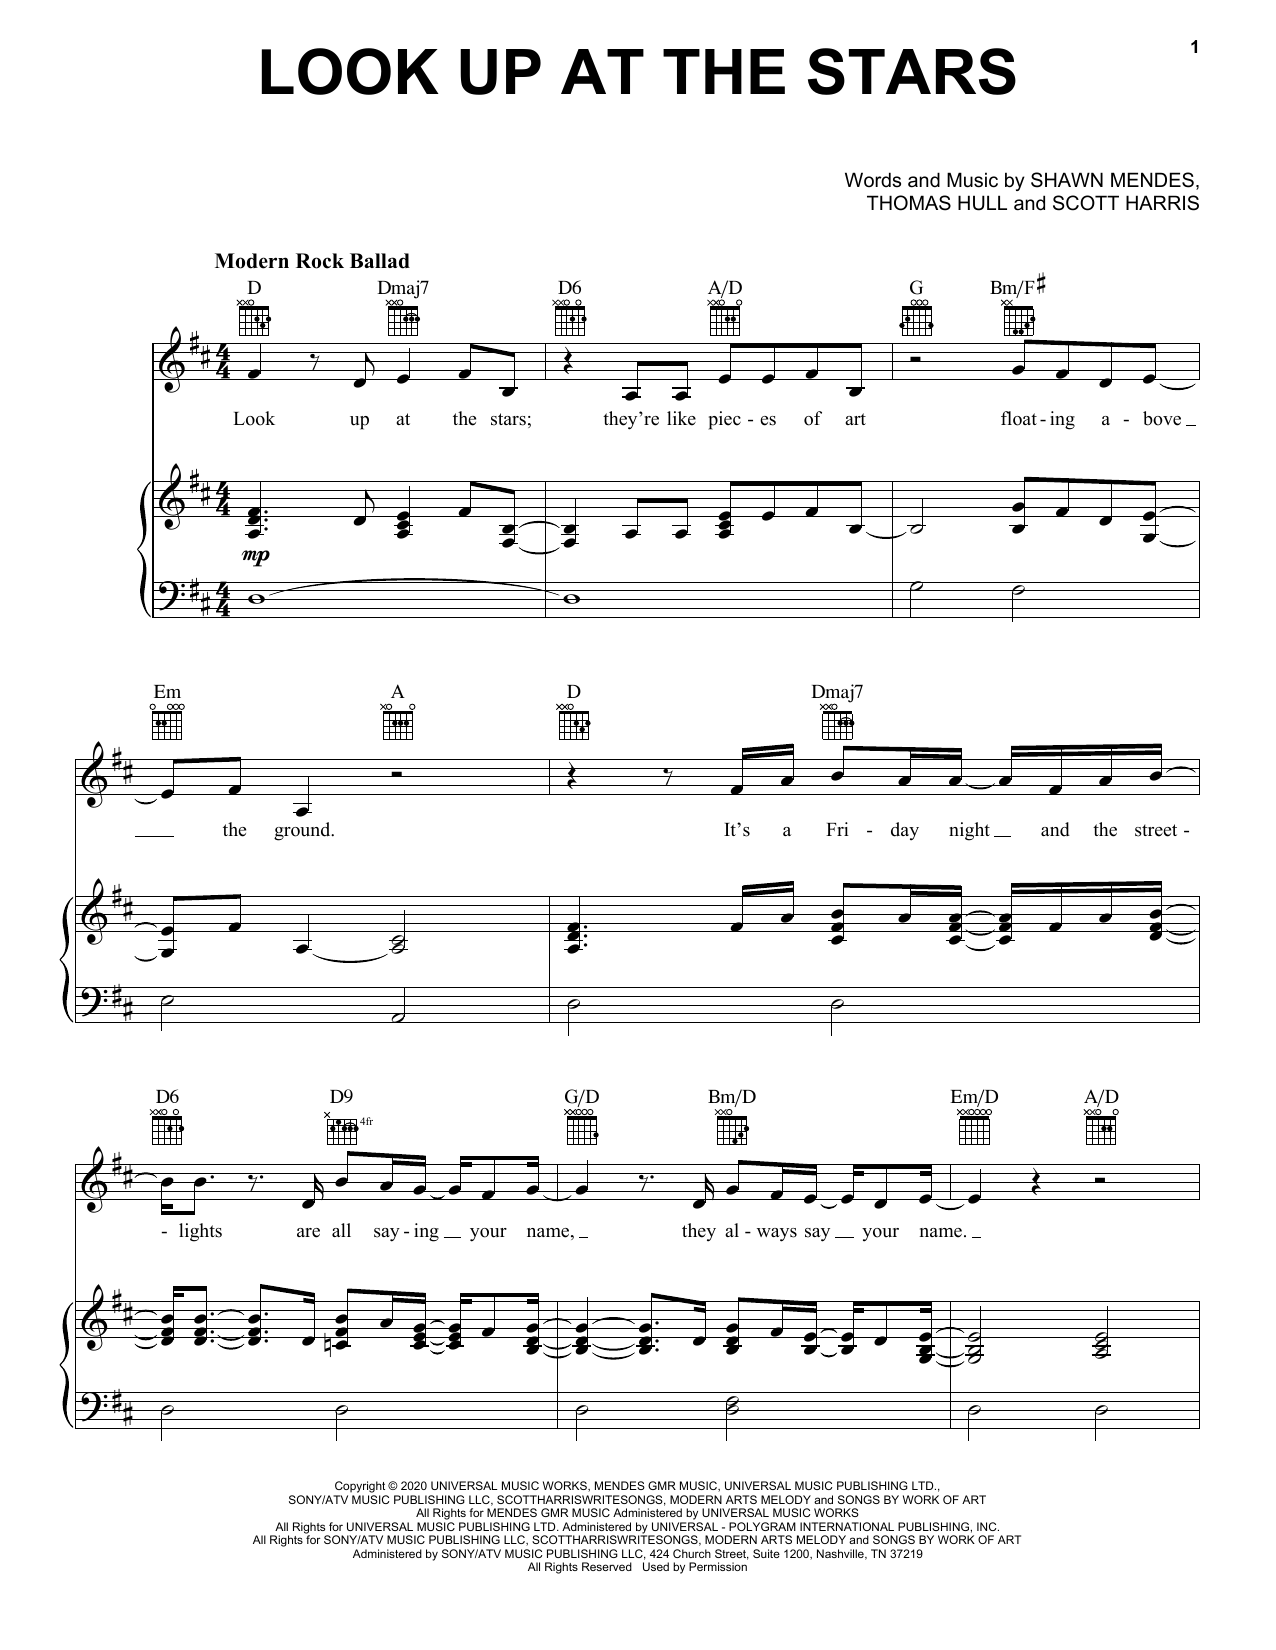 Download Shawn Mendes Look Up At The Stars Sheet Music